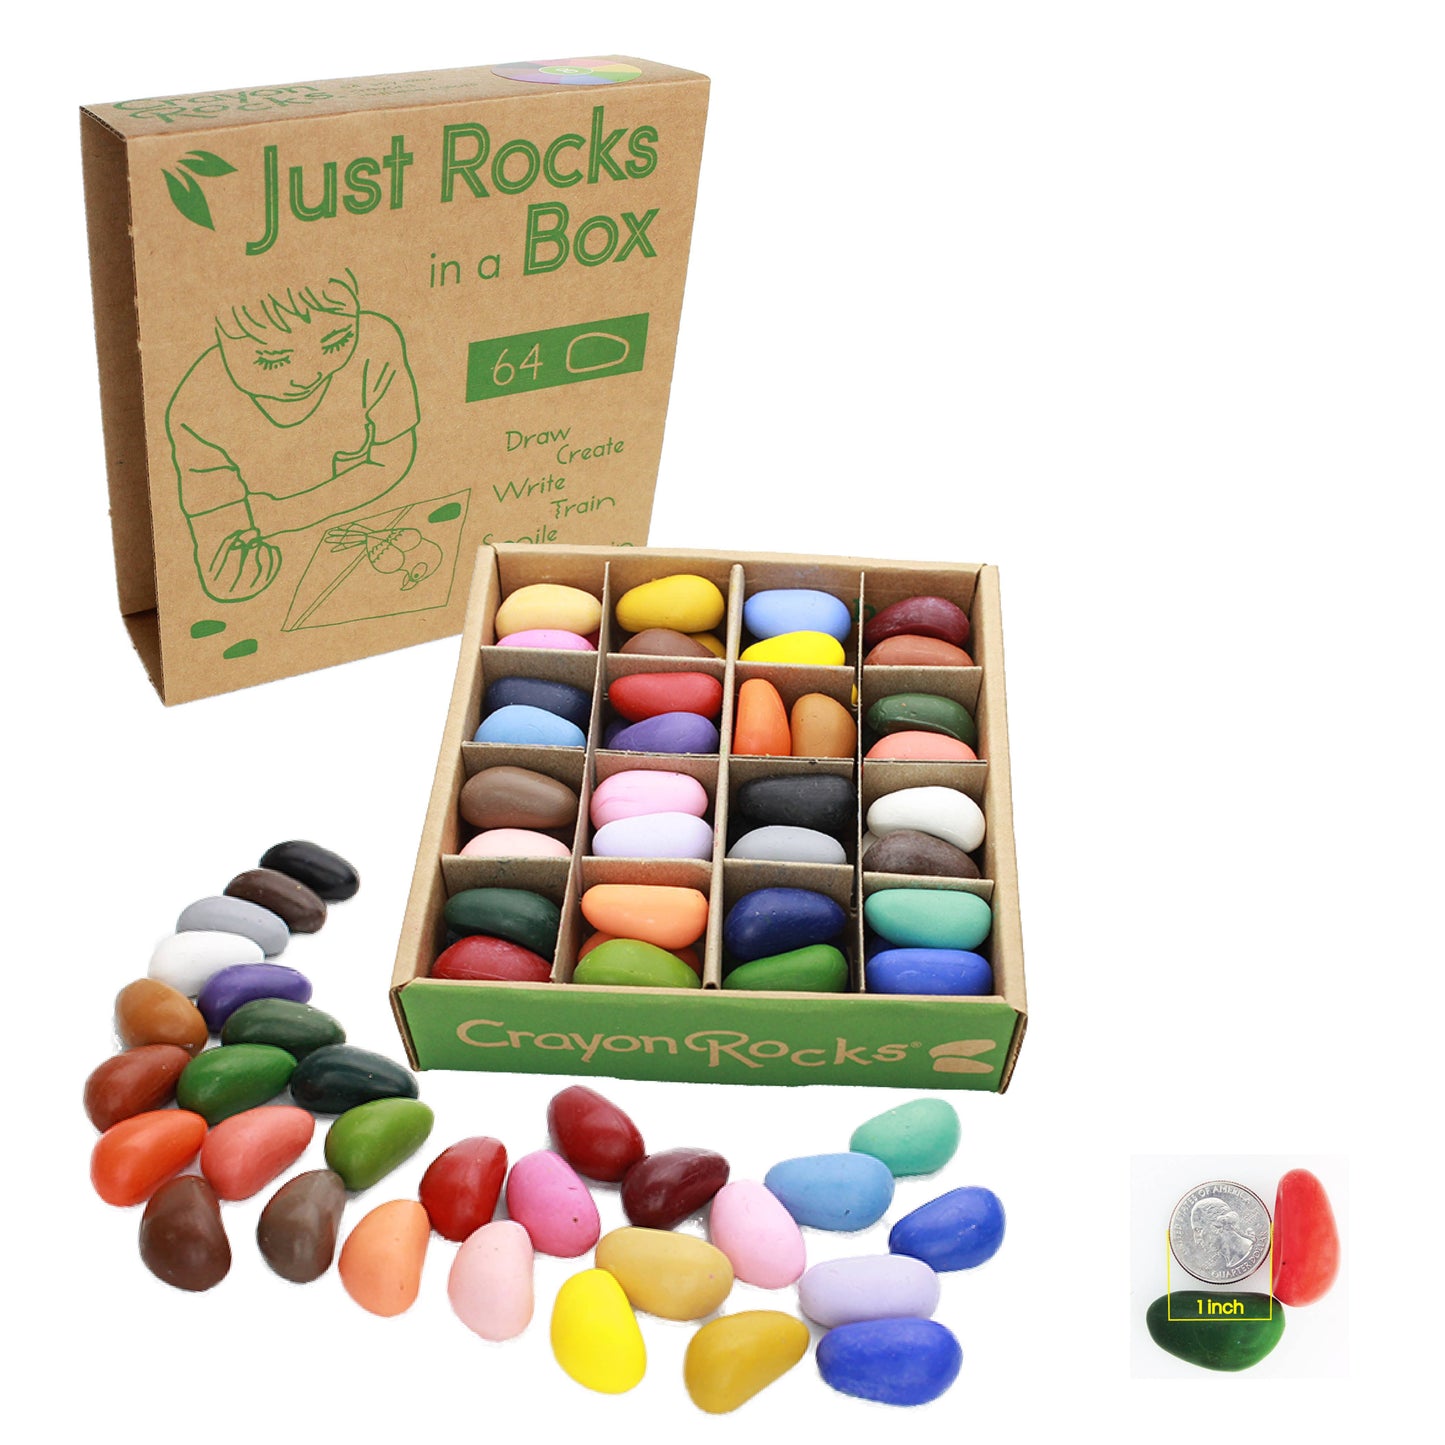 Just Rocks in a Box - 32 Colors / 64 Crayons